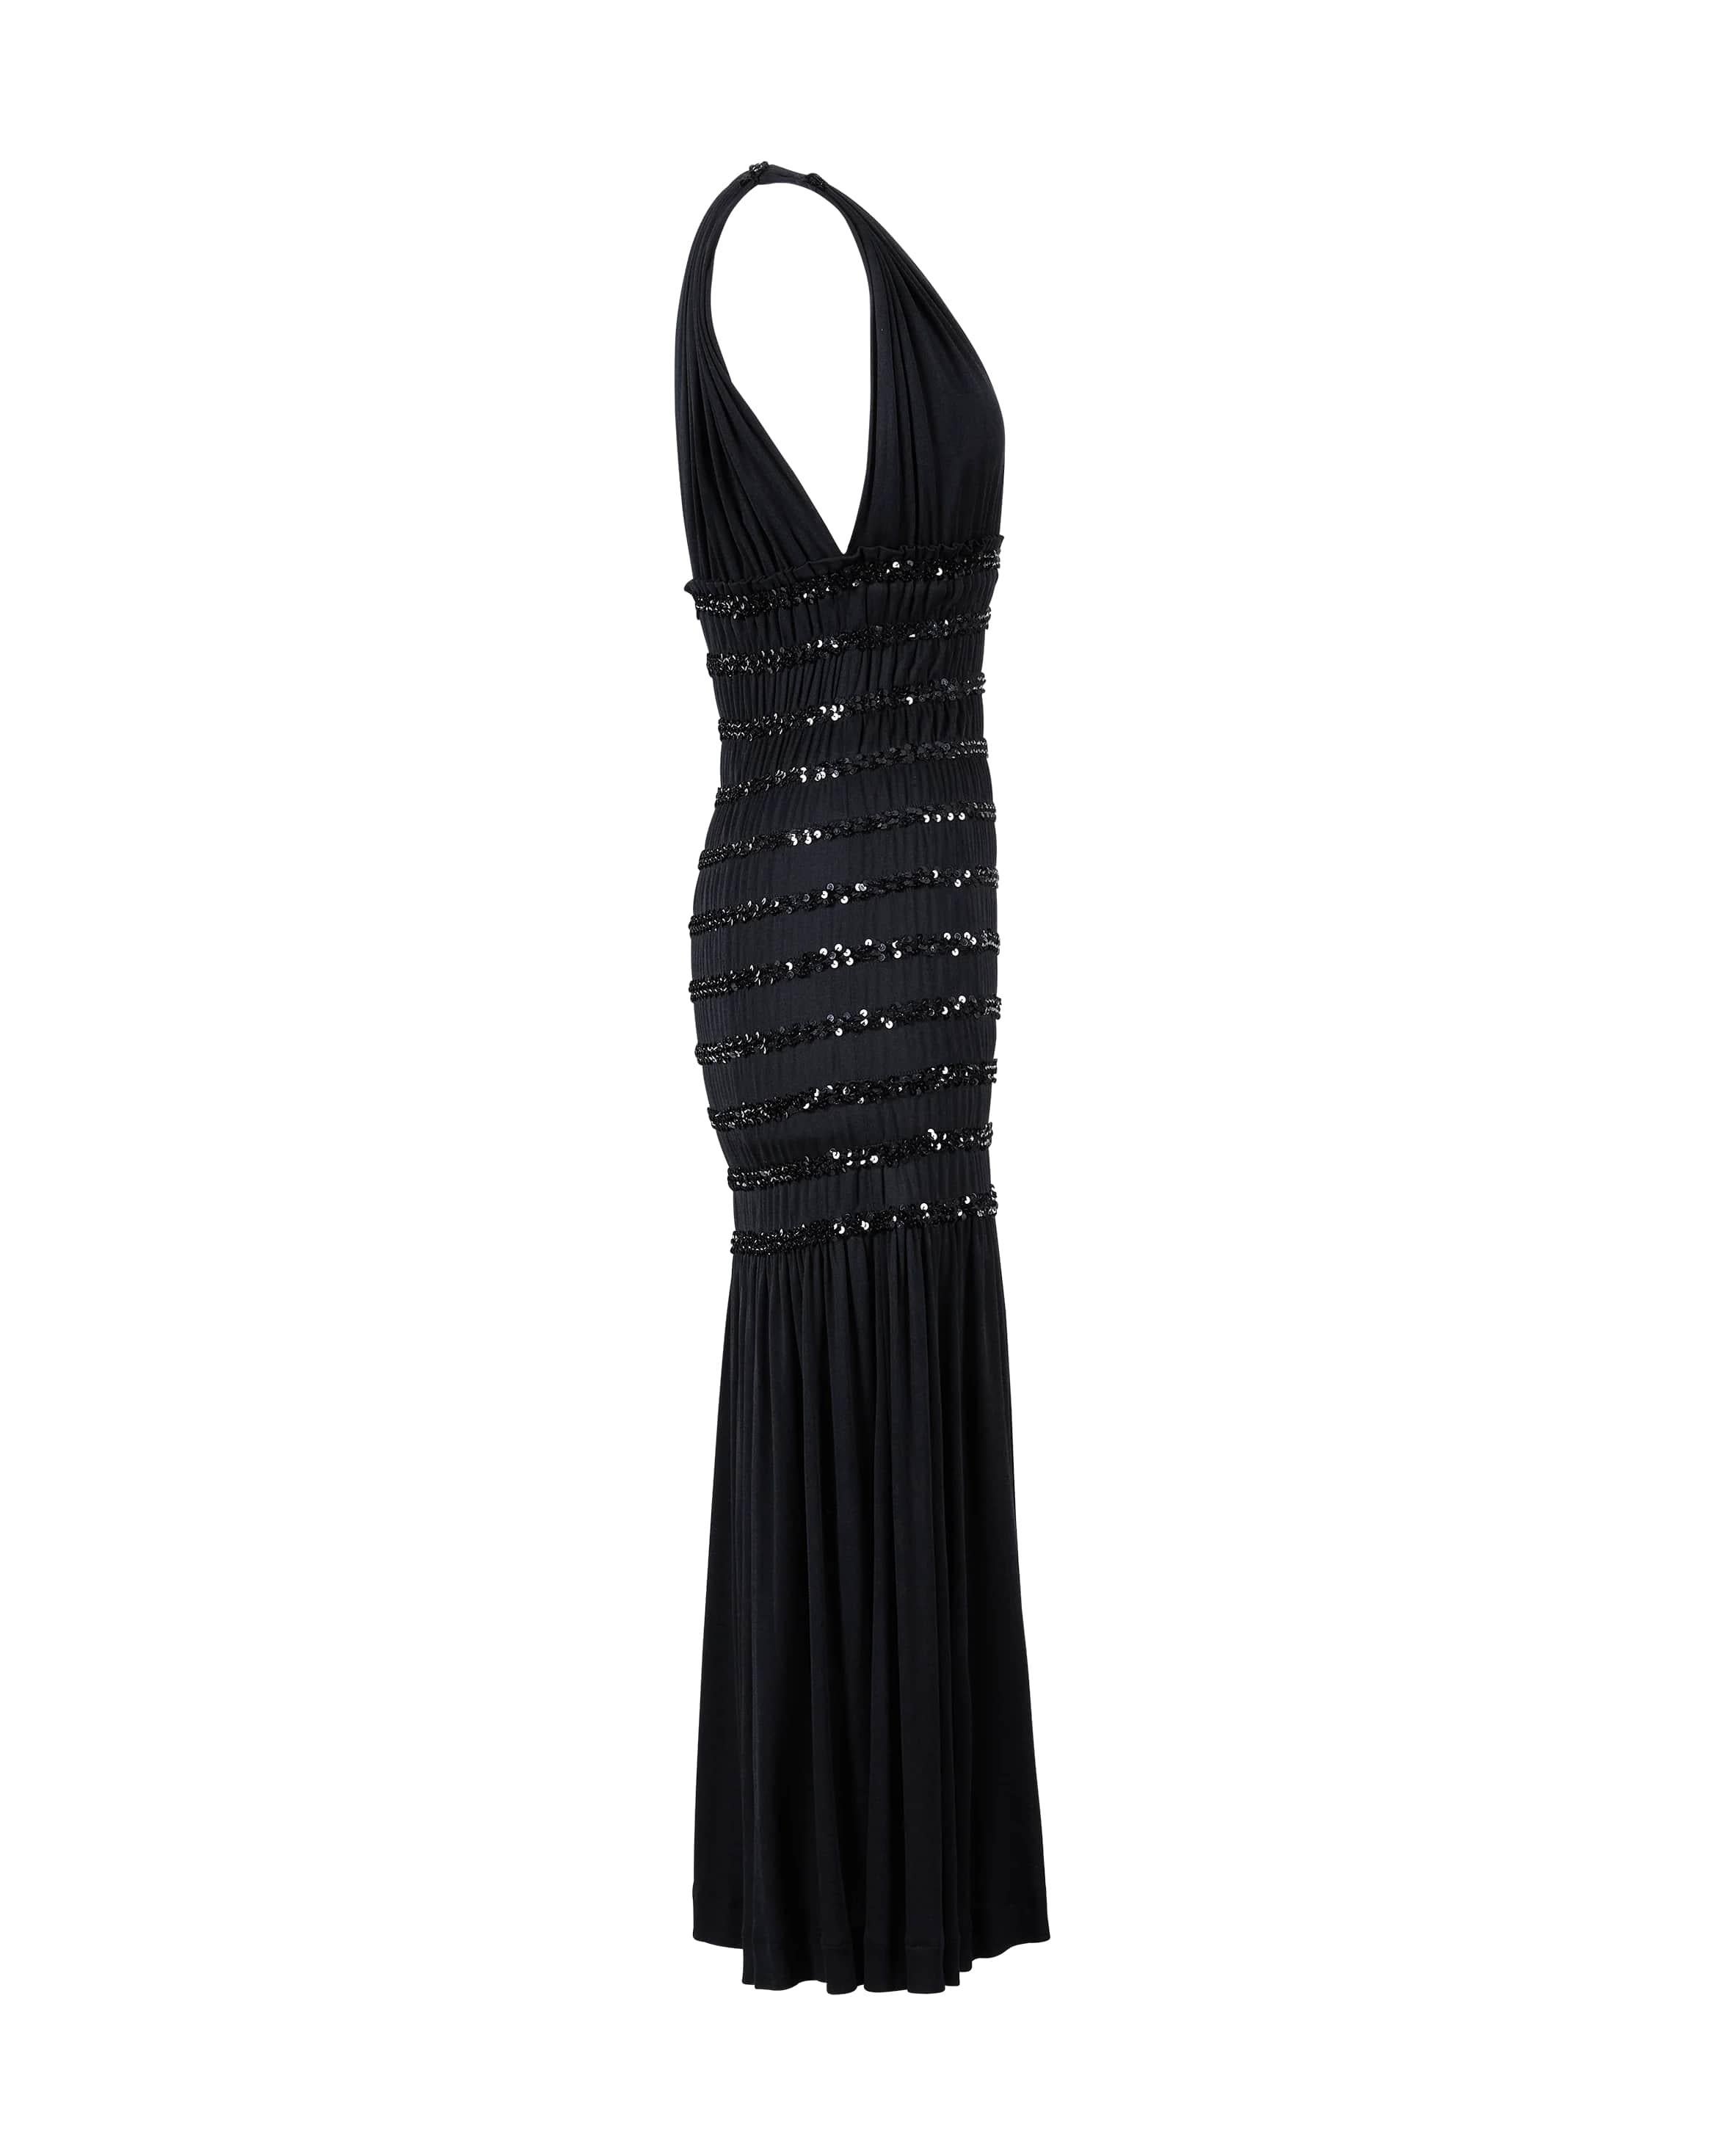 1983 Yves Saint Laurent Rive Gauche black jersey sequin midi dress. Sleeveless black dress with sequin details across ruched waist through hip. Moderate stretch throughout. 
